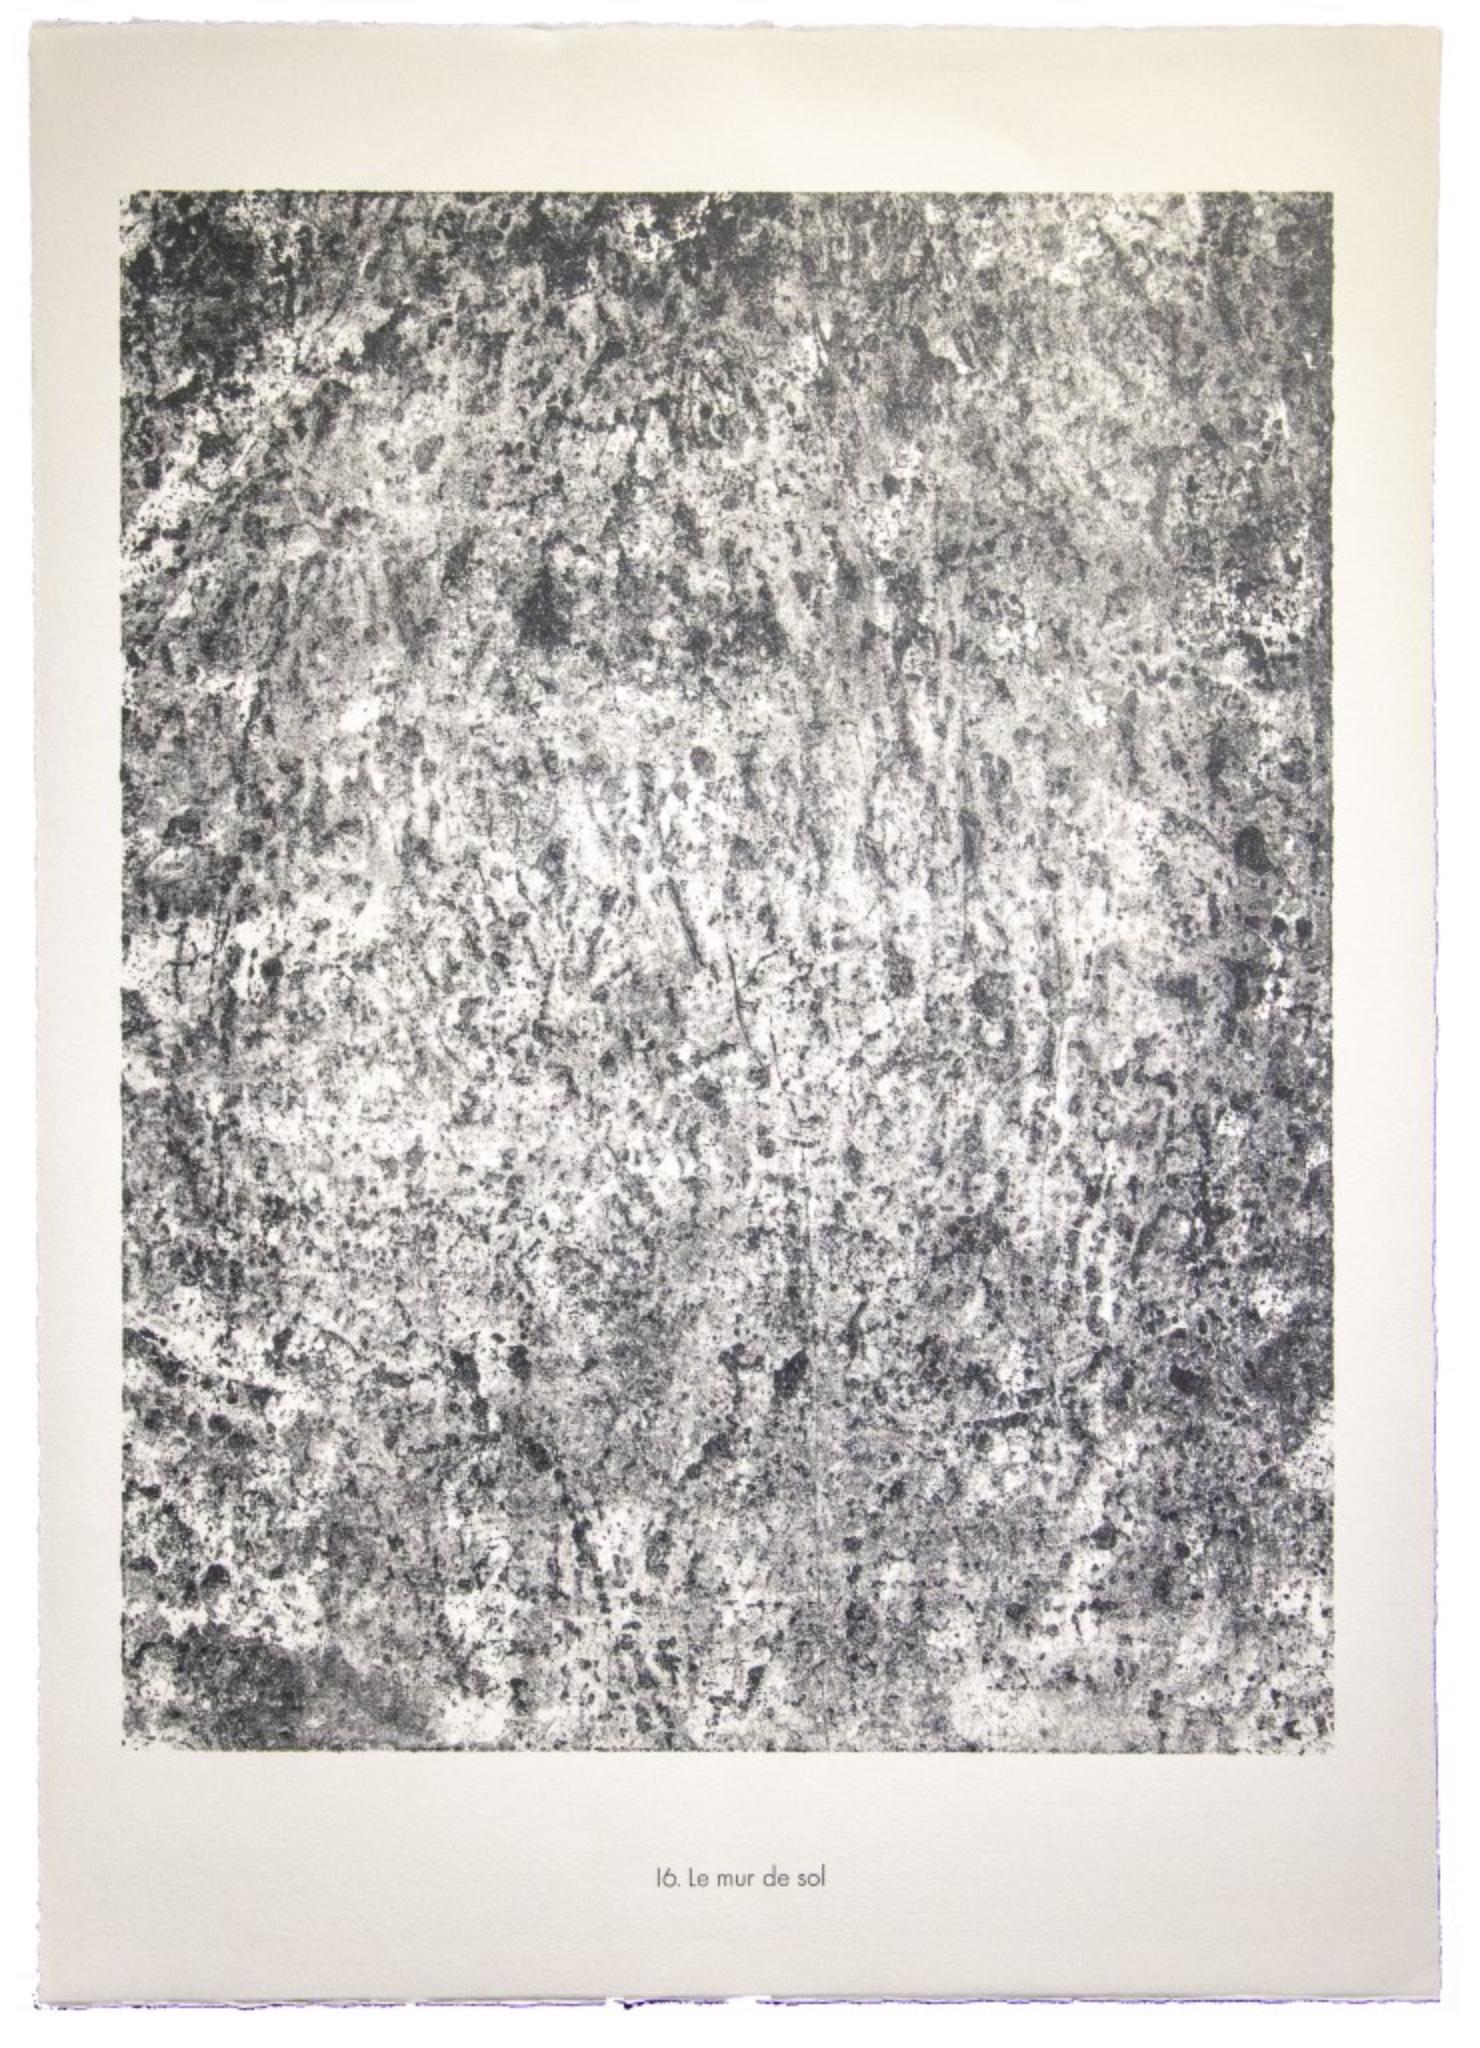 Le mur de sol is an original lithograph. Abstract composition by the French artist Jean Dubuffet. 
From the album of "Sols, Terres" (1953-1959). In excellent conditions.

Reference: Cat. Silkeborg n° 357/ Cat. S. Webel n°560. 

Image Dimensions: